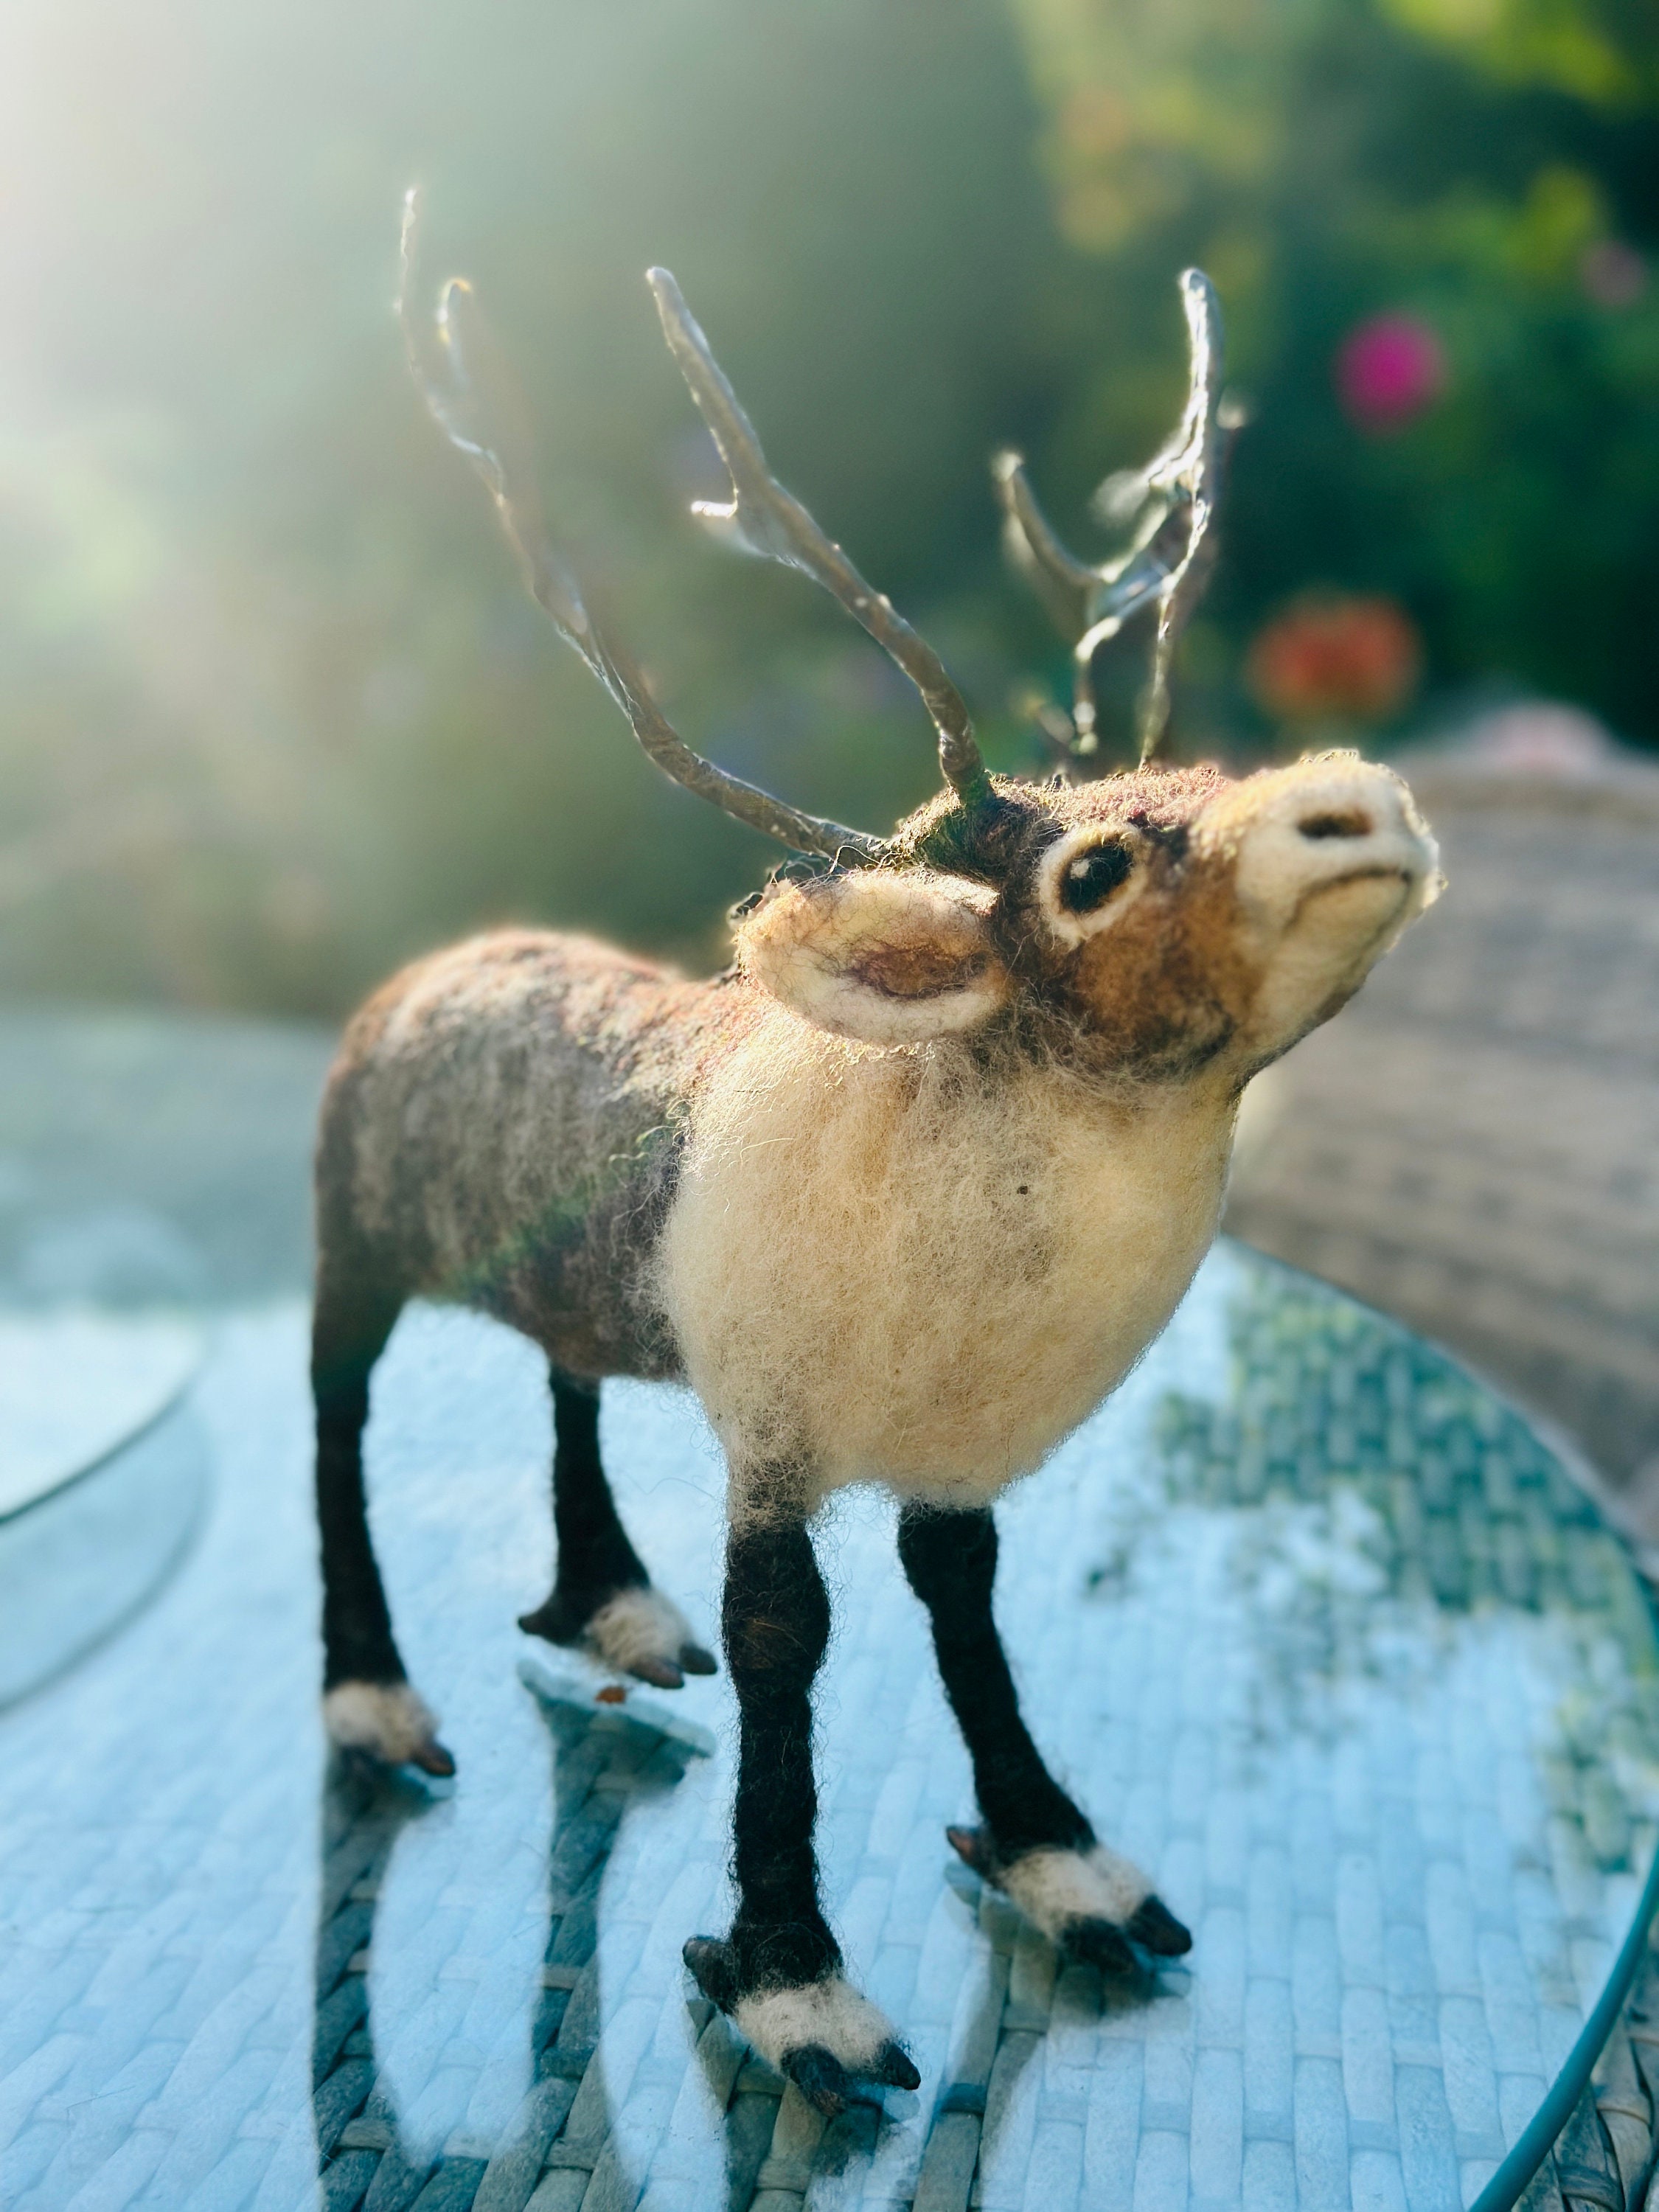 Making Large Needle Felt Animals: The Goose with wire armature